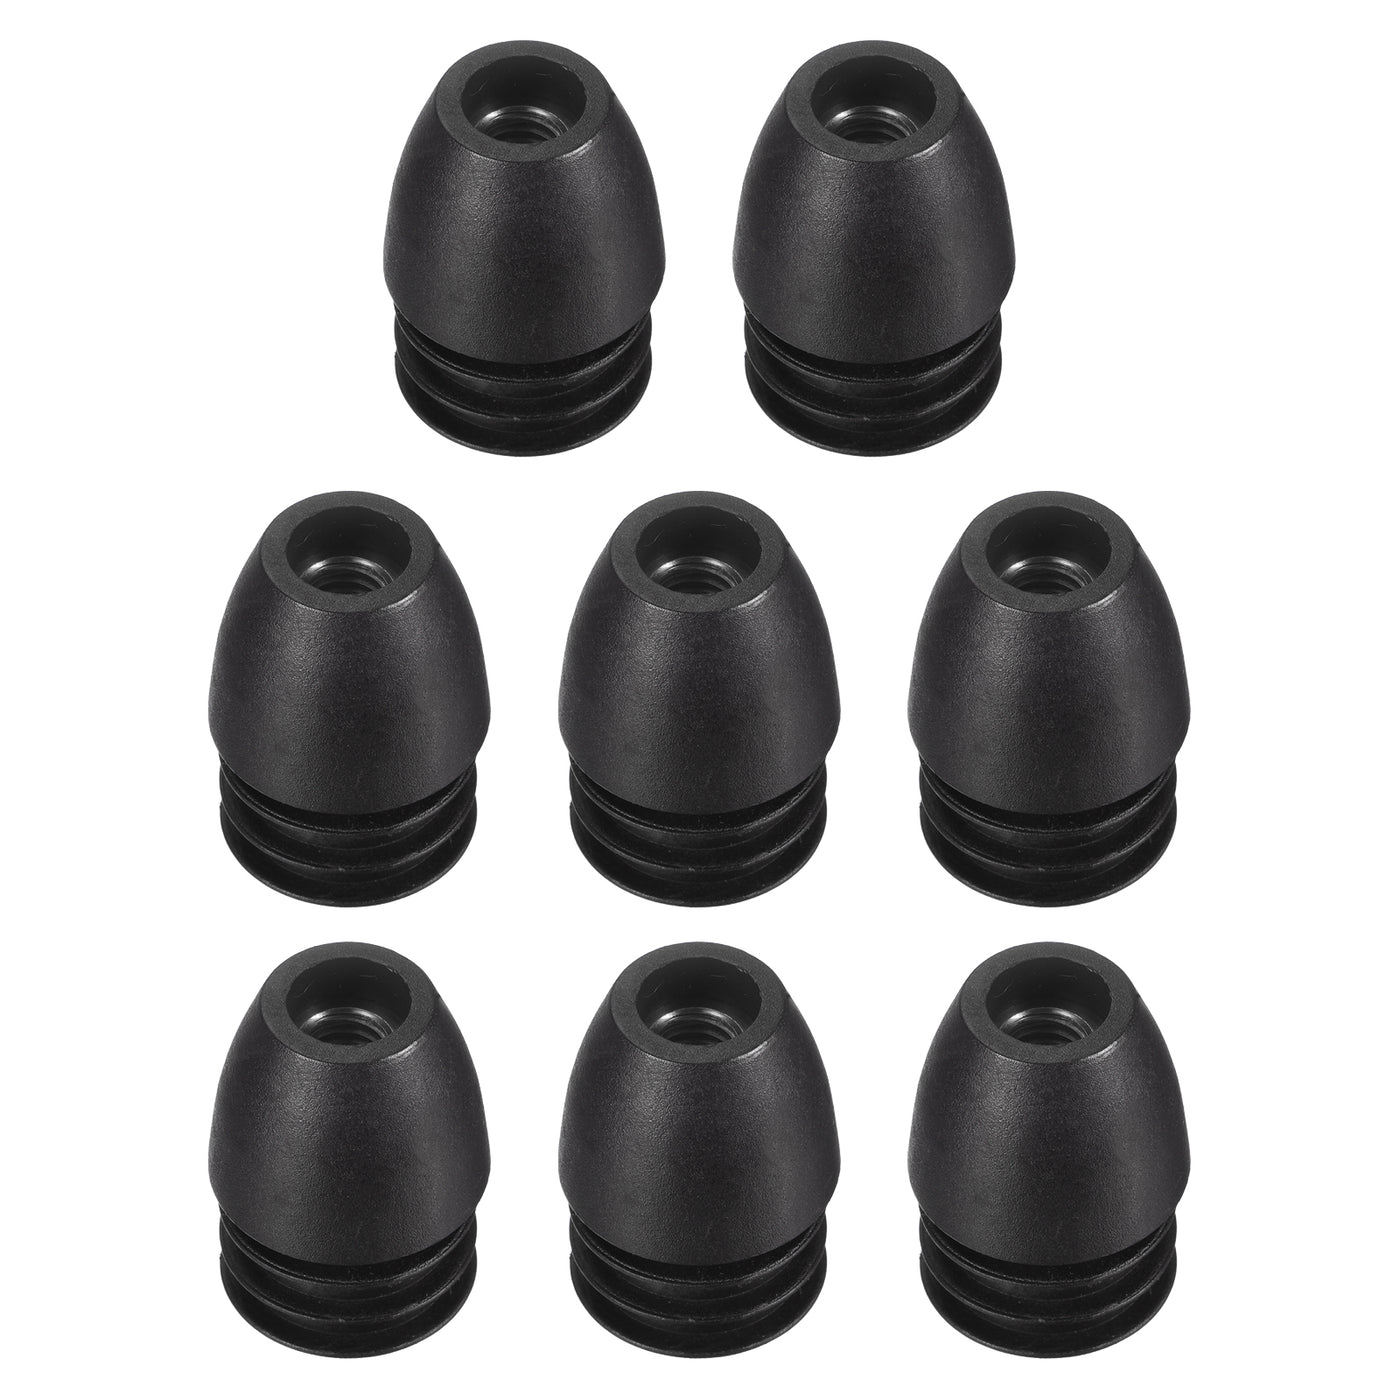 uxcell Uxcell 8Pcs 25mm/0.98" Caster Insert with Thread, M8 Thread for Furniture